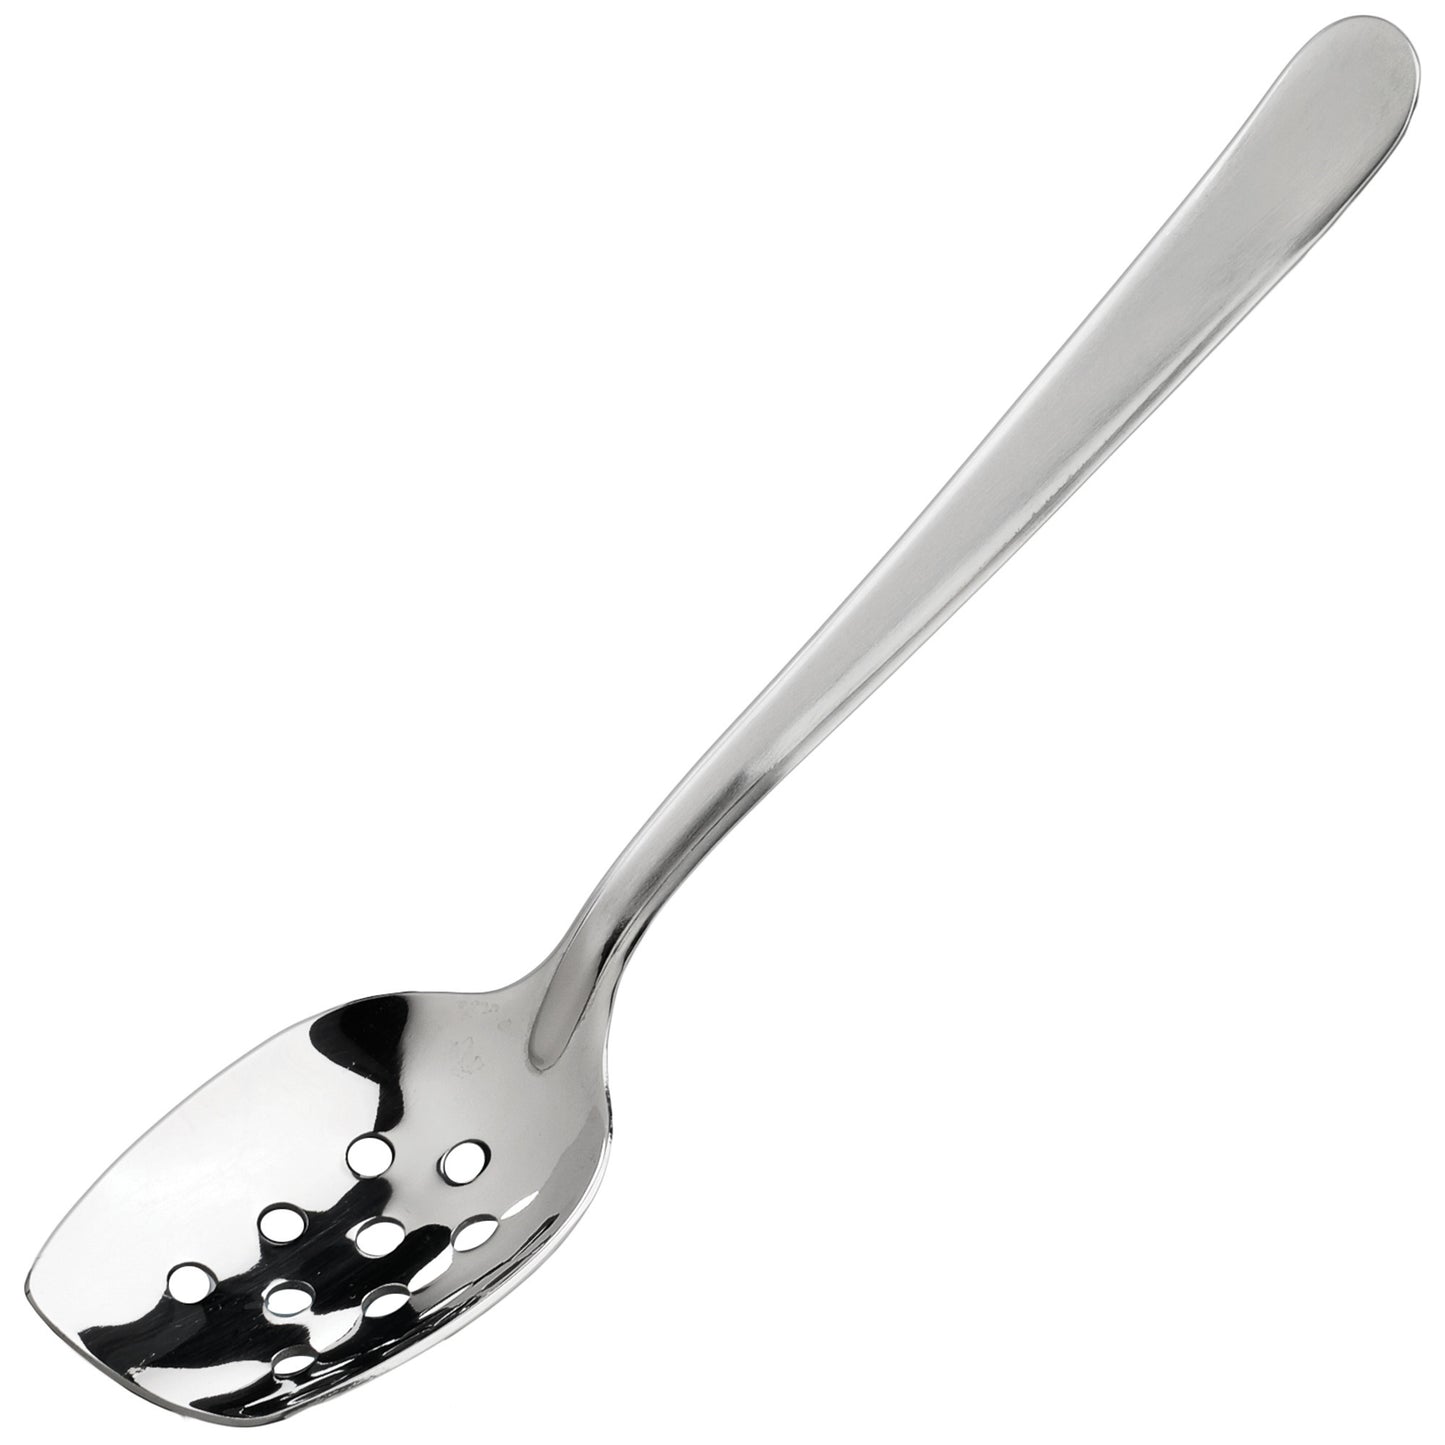 SPS-P8 - Slanted Plating Spoon - Perforated, 8"